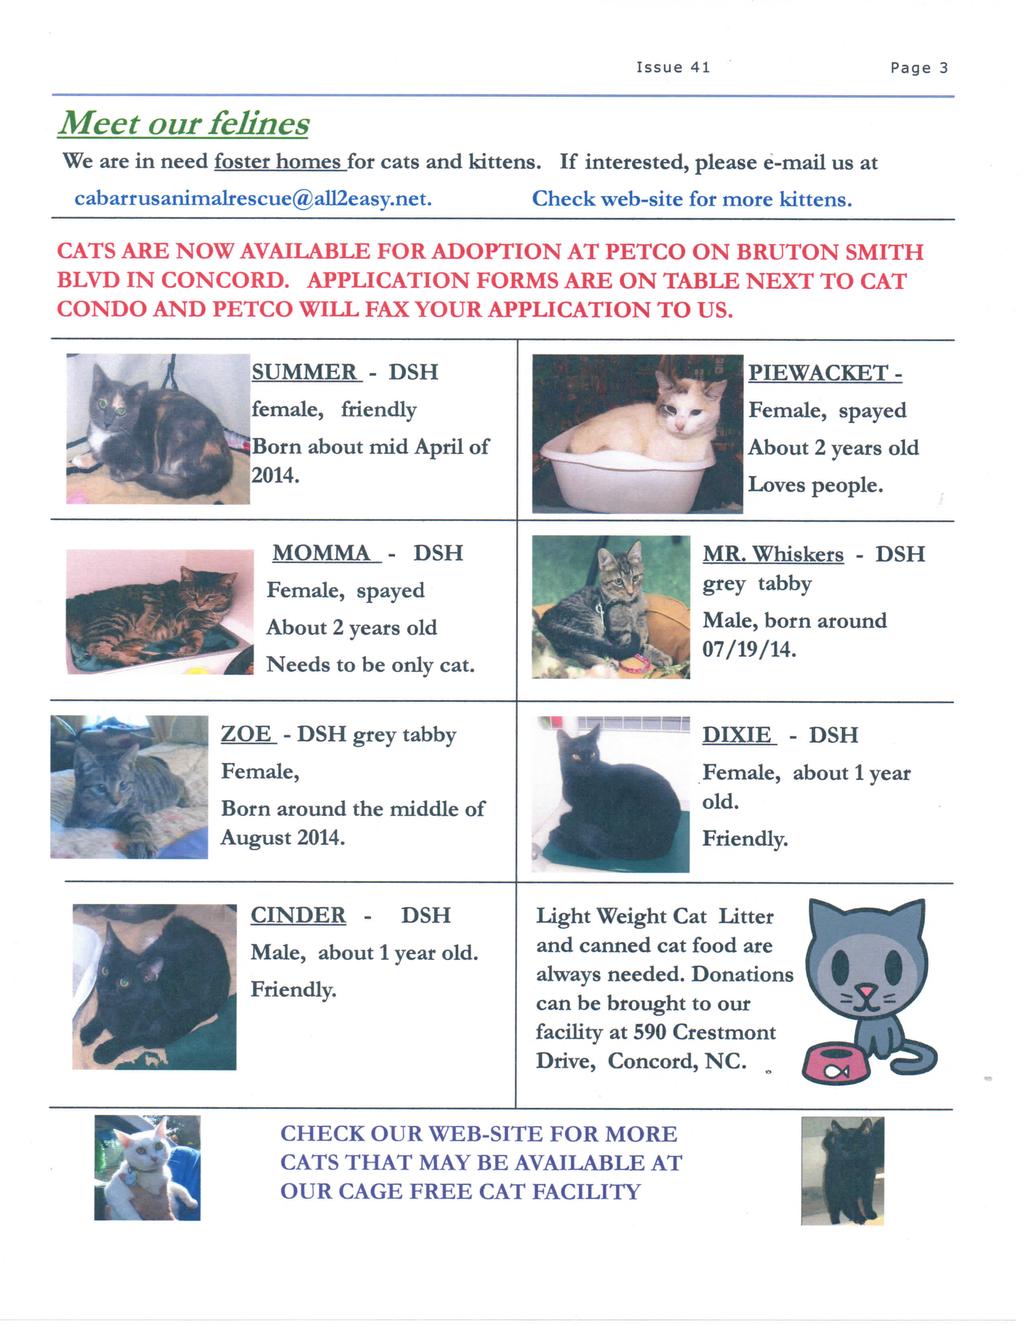 Meet our felines Issue 41 Page 3 We are in need foster homes for cats and kittens. If interested, please e-mail us at cabarrusanimalrescue@all2easy.net. Check web-site for more kittens.